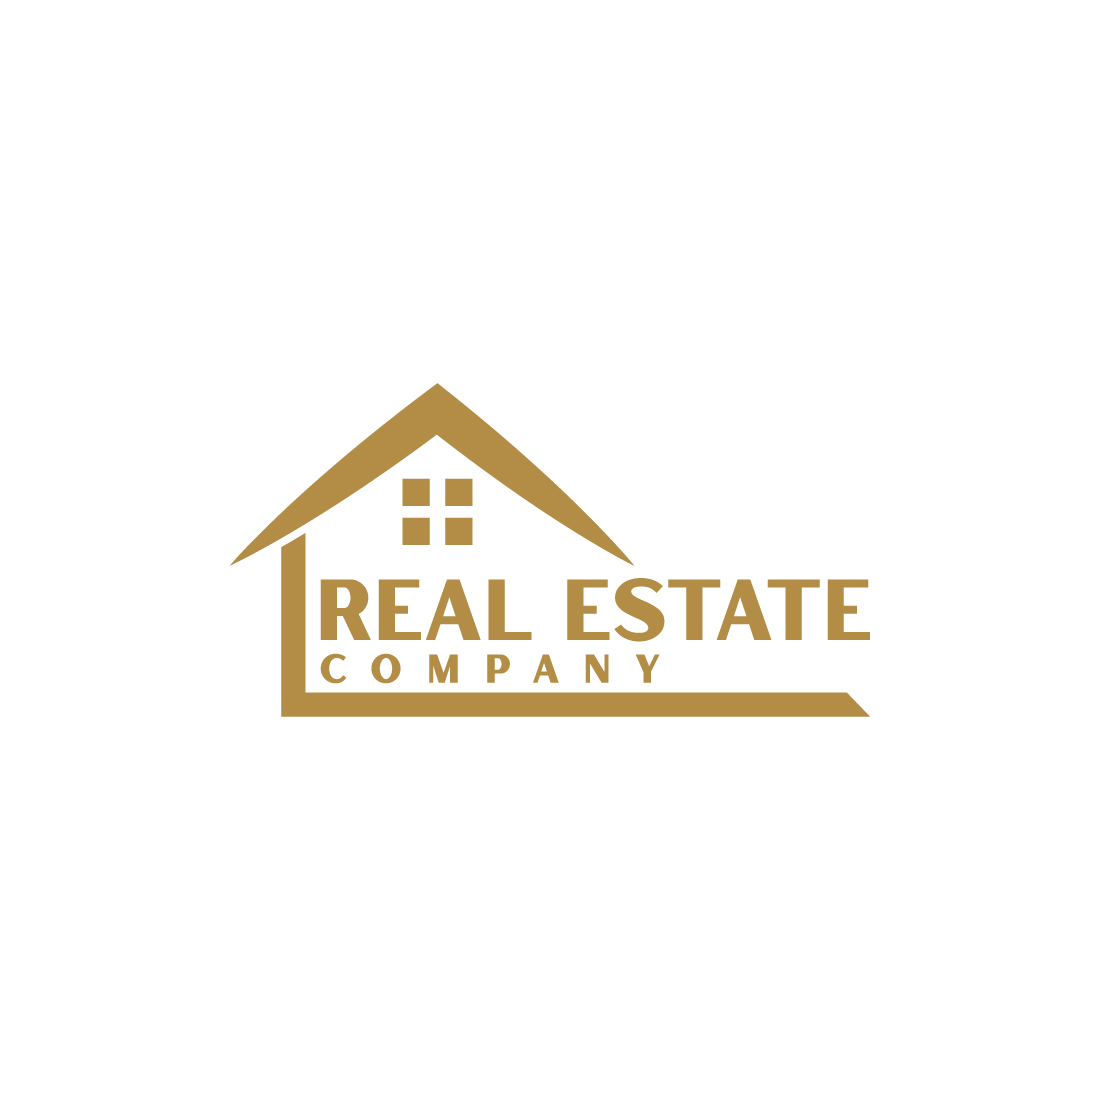 Real estate logo with Golden color cover image.